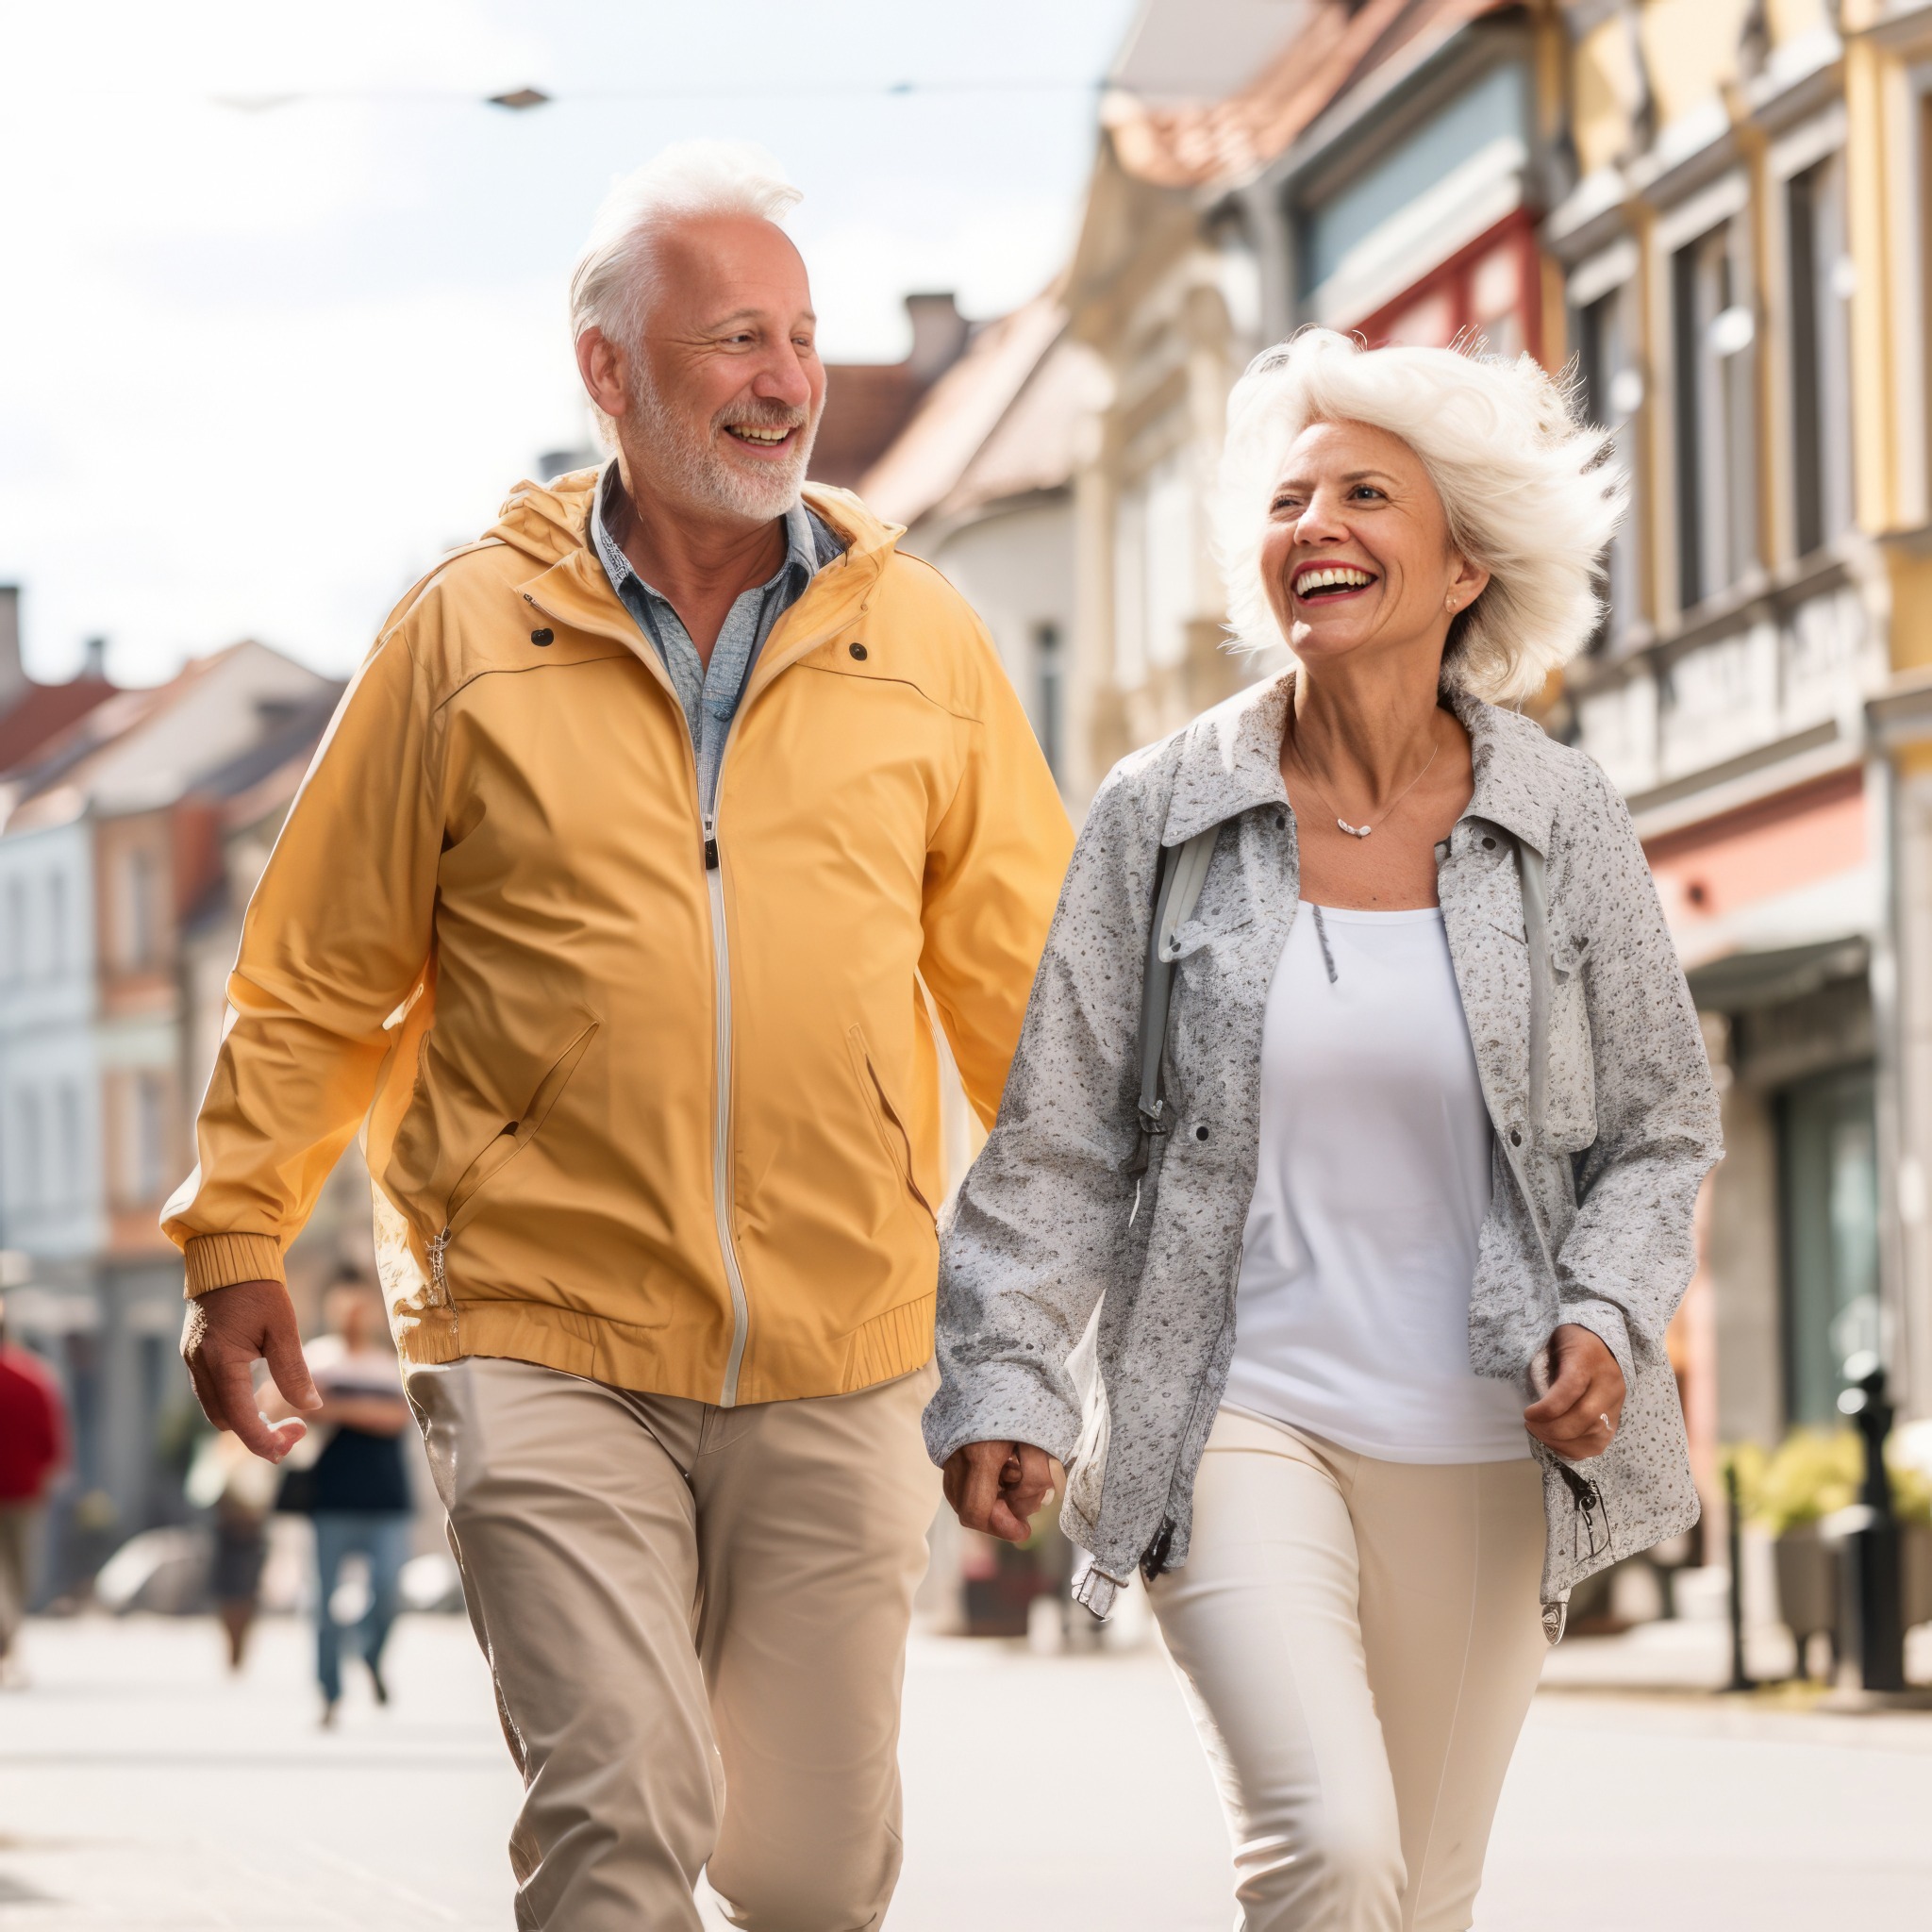 Five Ways to Welcome Spring With Your Senior Loved One